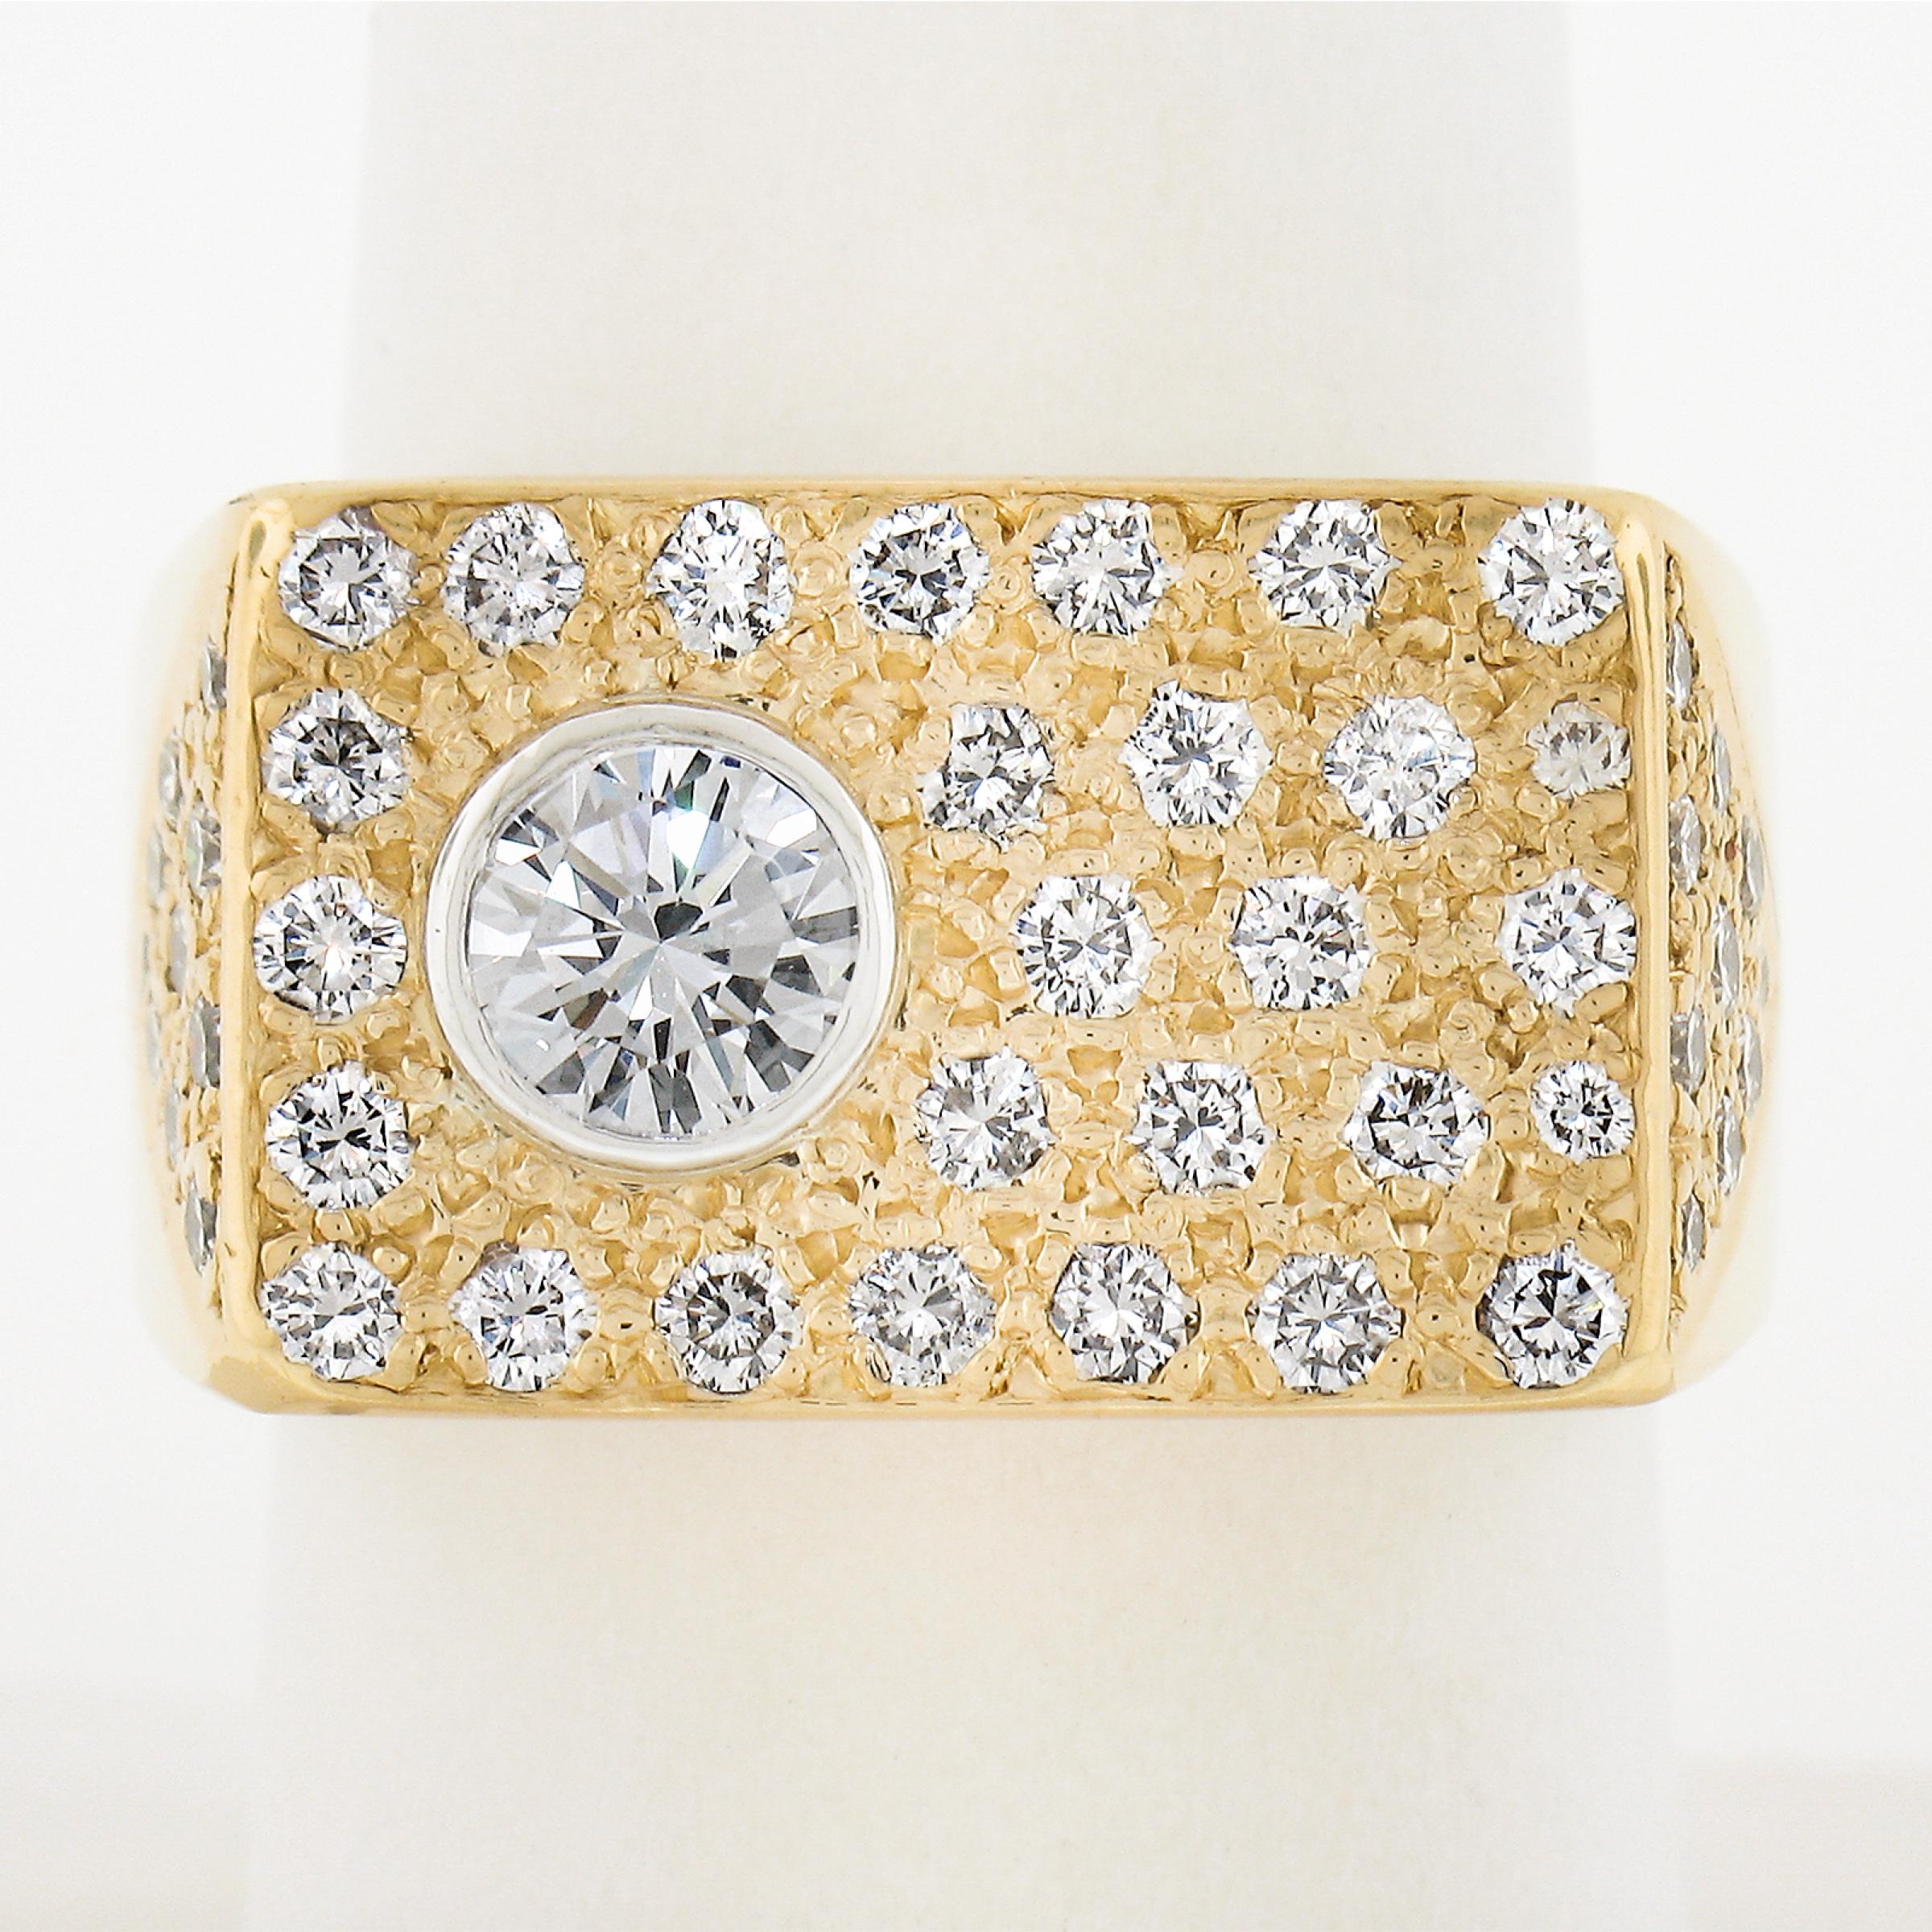 This men's geometric ring is crafted in solid 18k yellow gold and features a wide rectangular top adorned with 28 round brilliant cut diamonds across its top & part of the shoulders. There is 1 round brilliant diamond that is set in a bezel. The